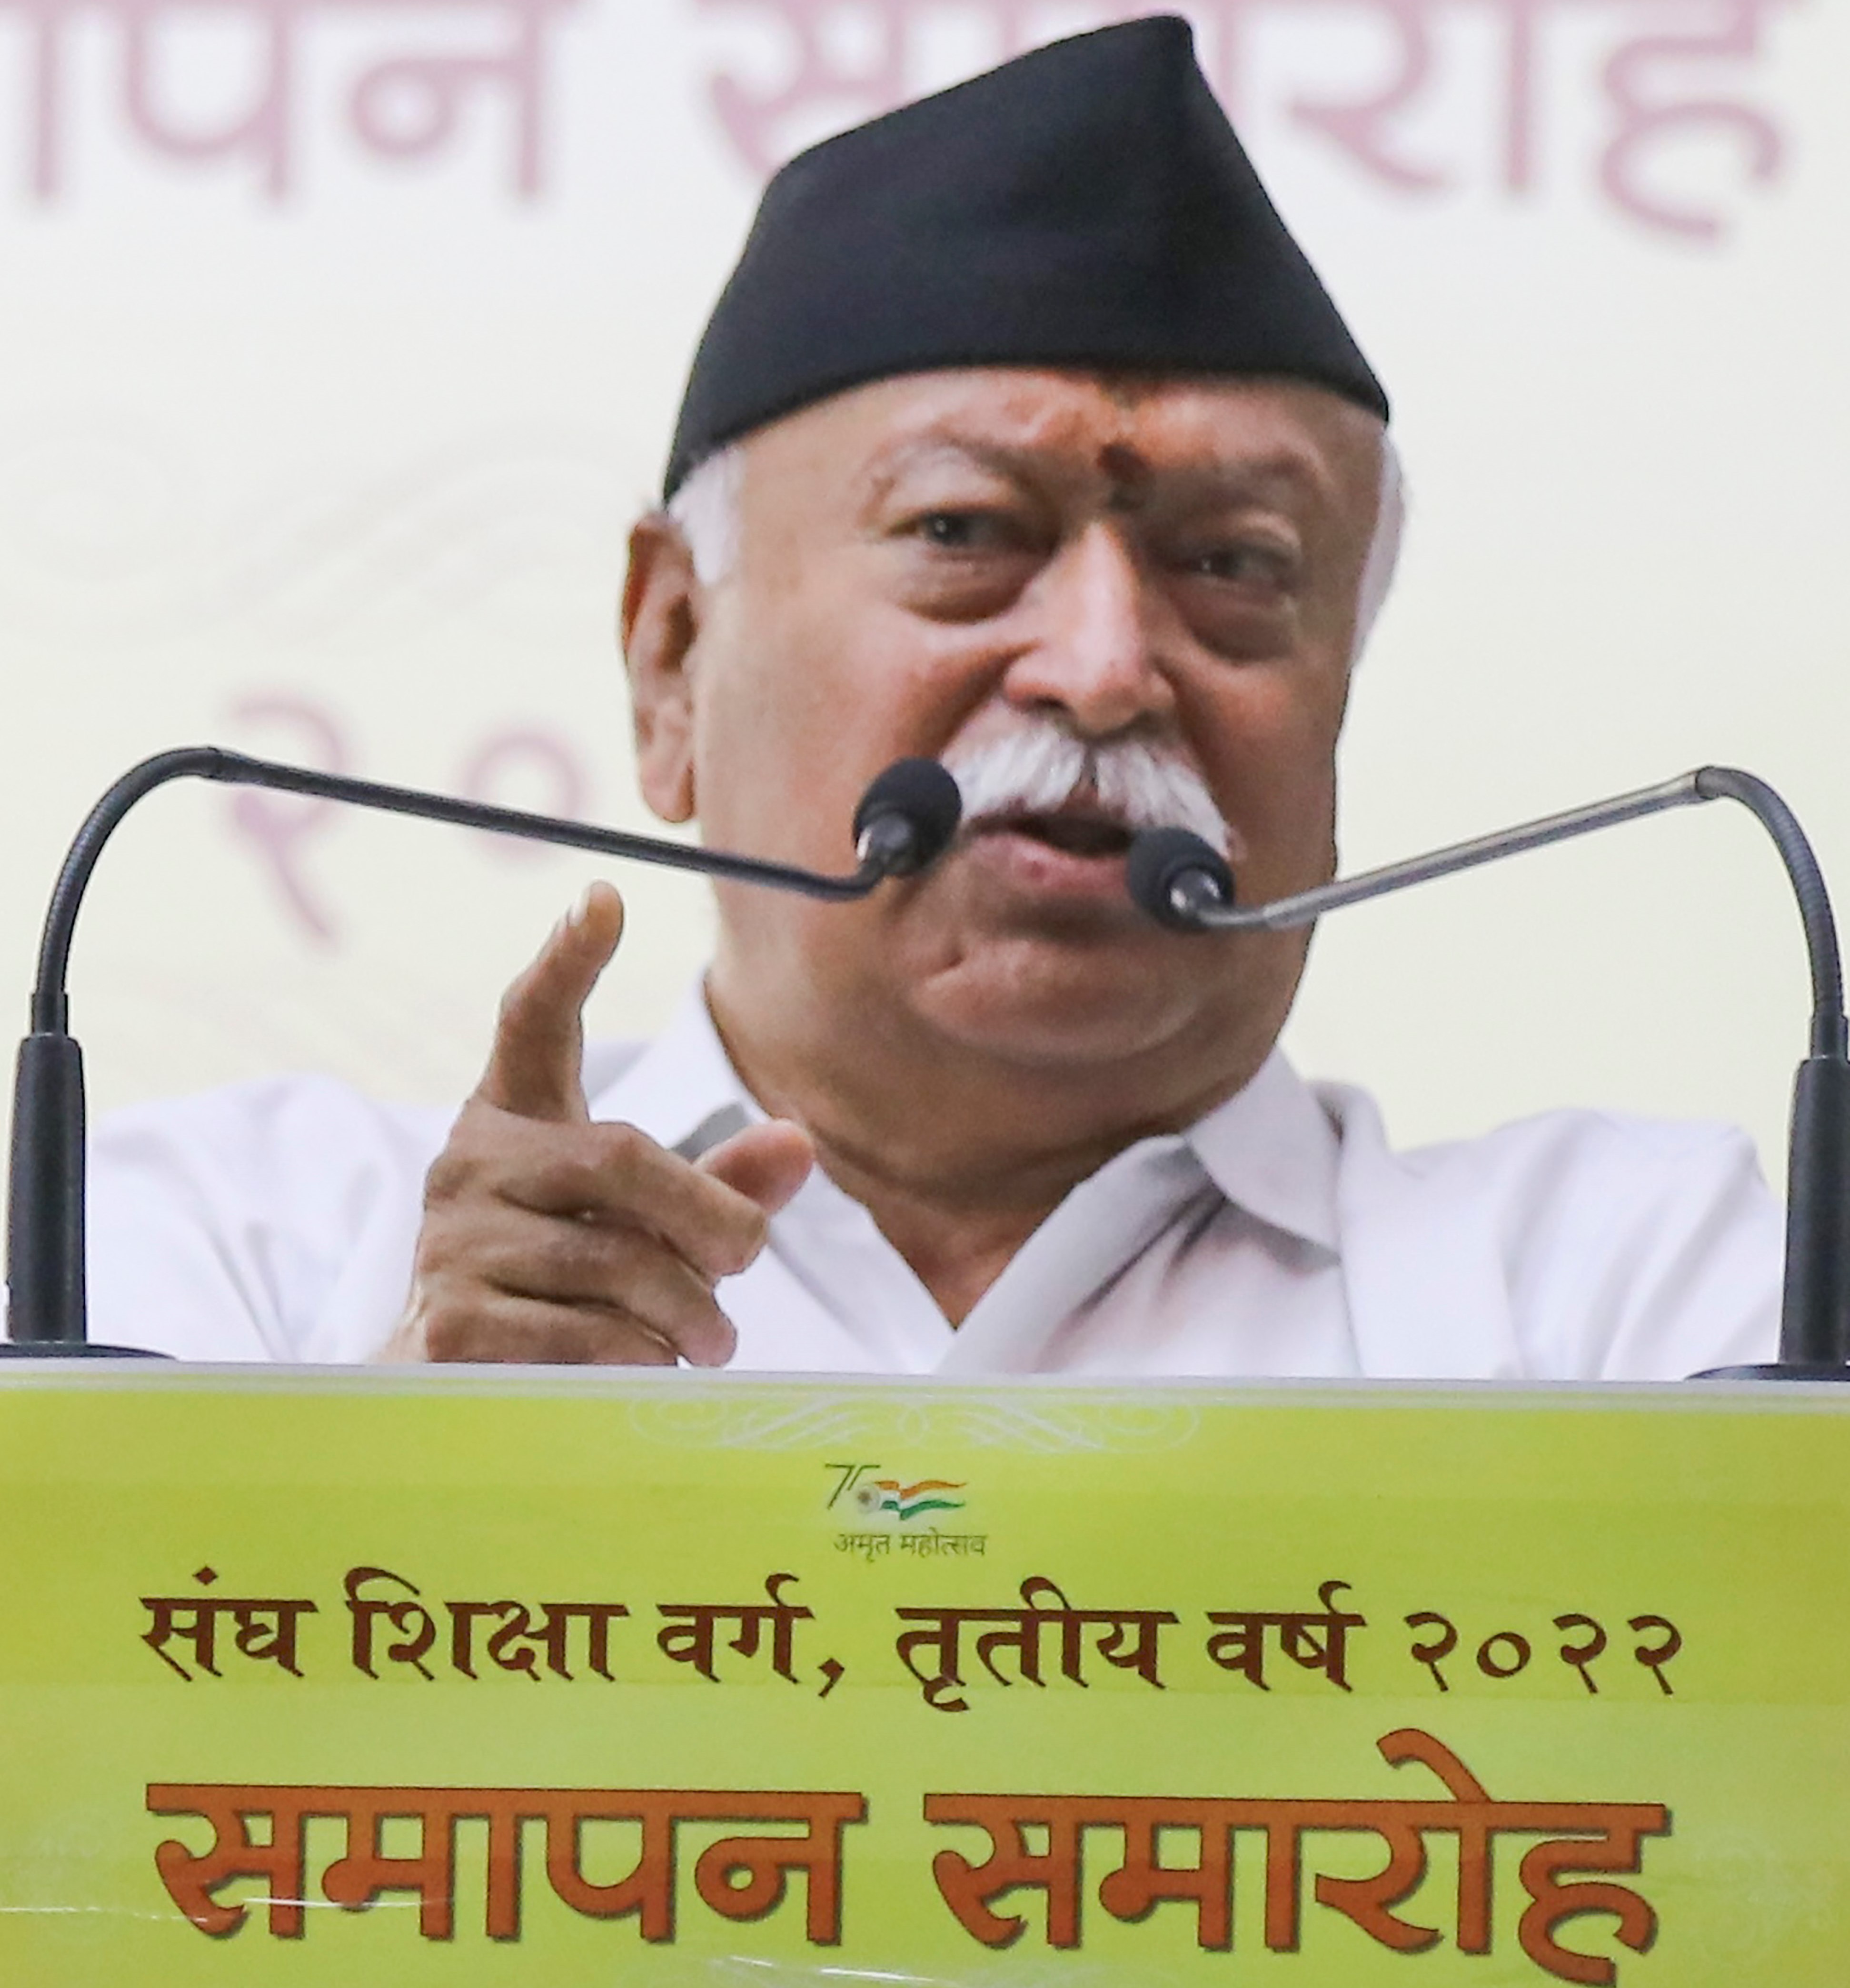 No need to look for Shivling in every mosque, why escalate disputes: RSS chief Mohan Bhagwat